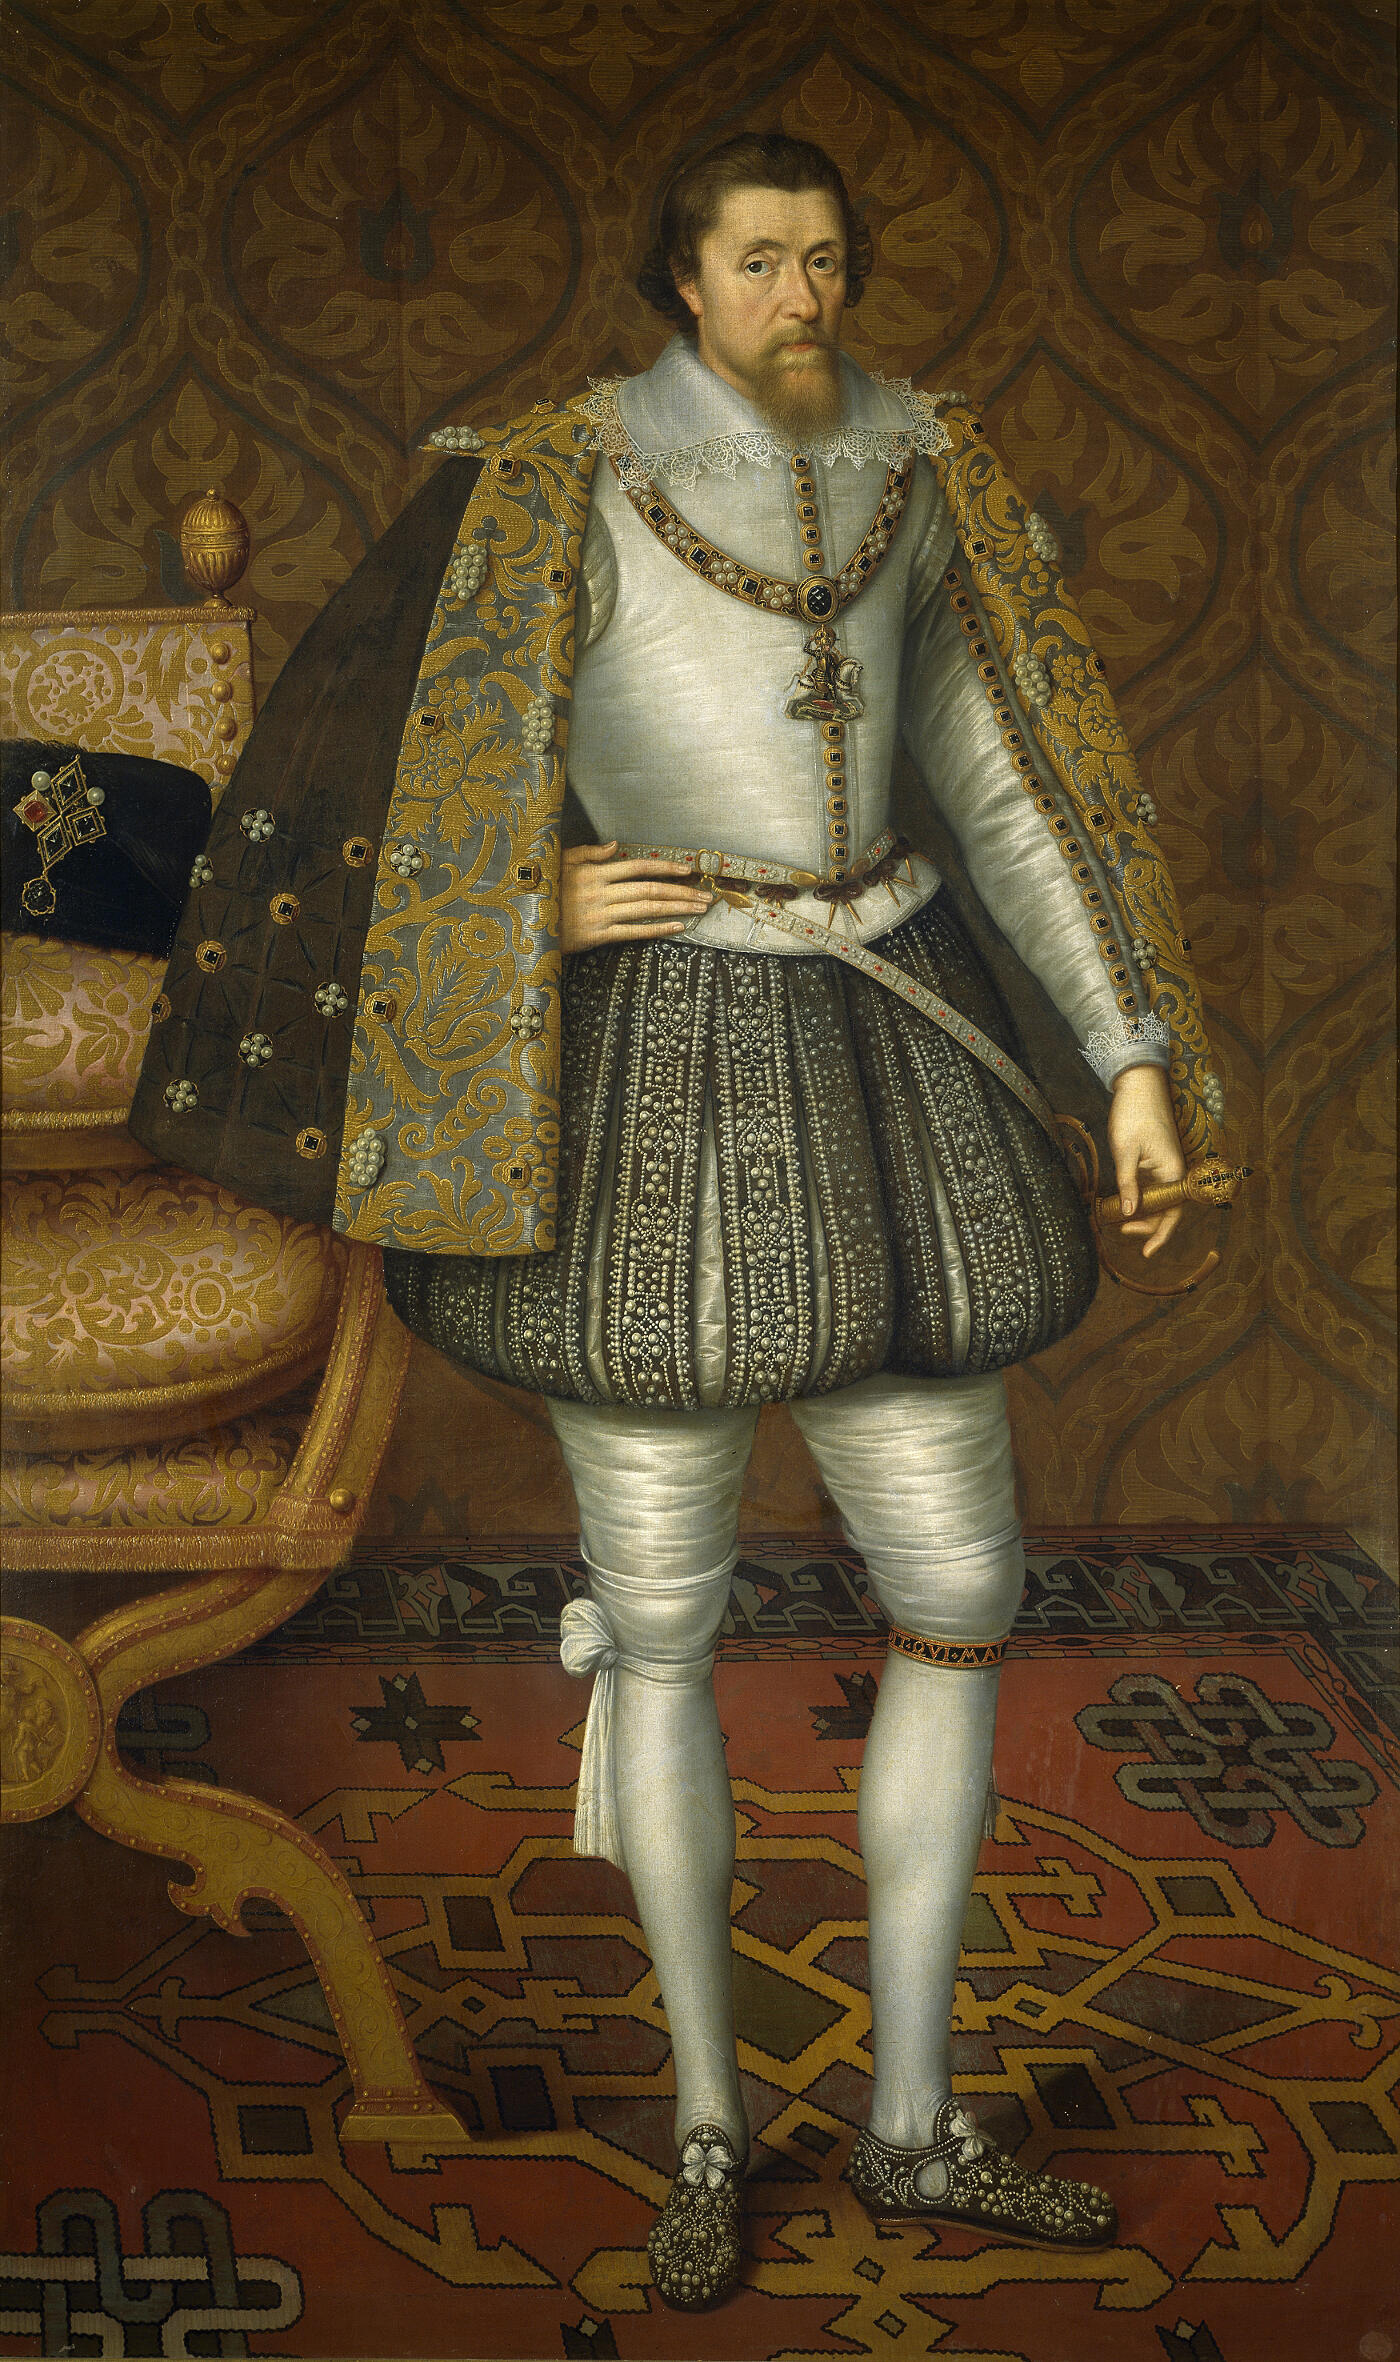 Oil painting of King James I of England, attributed to John de Critz. 